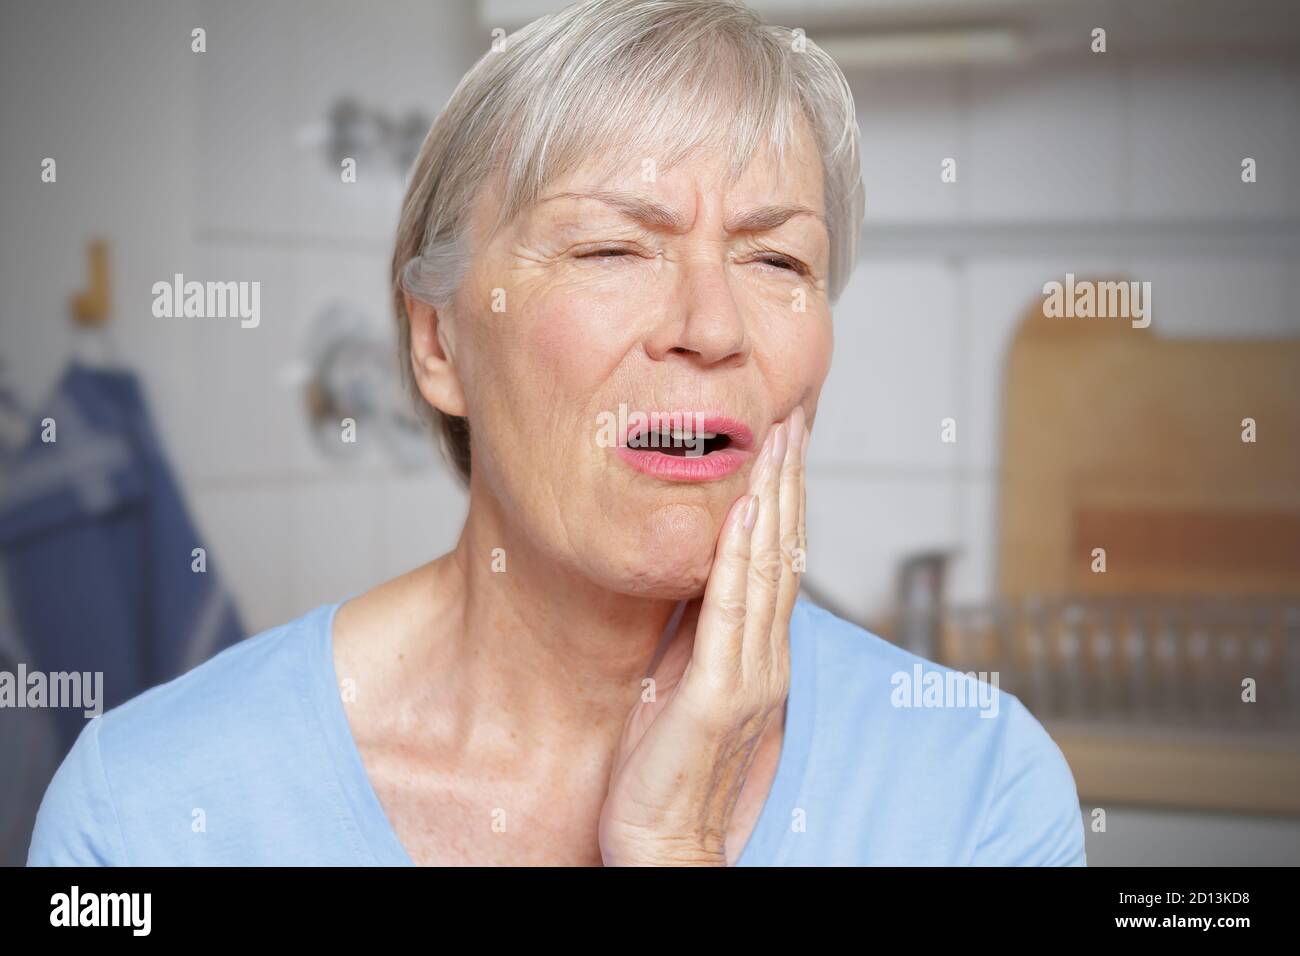 Acute toothache: elderly woman in her kitchen with a hand at her painful cheek. Stock Photo